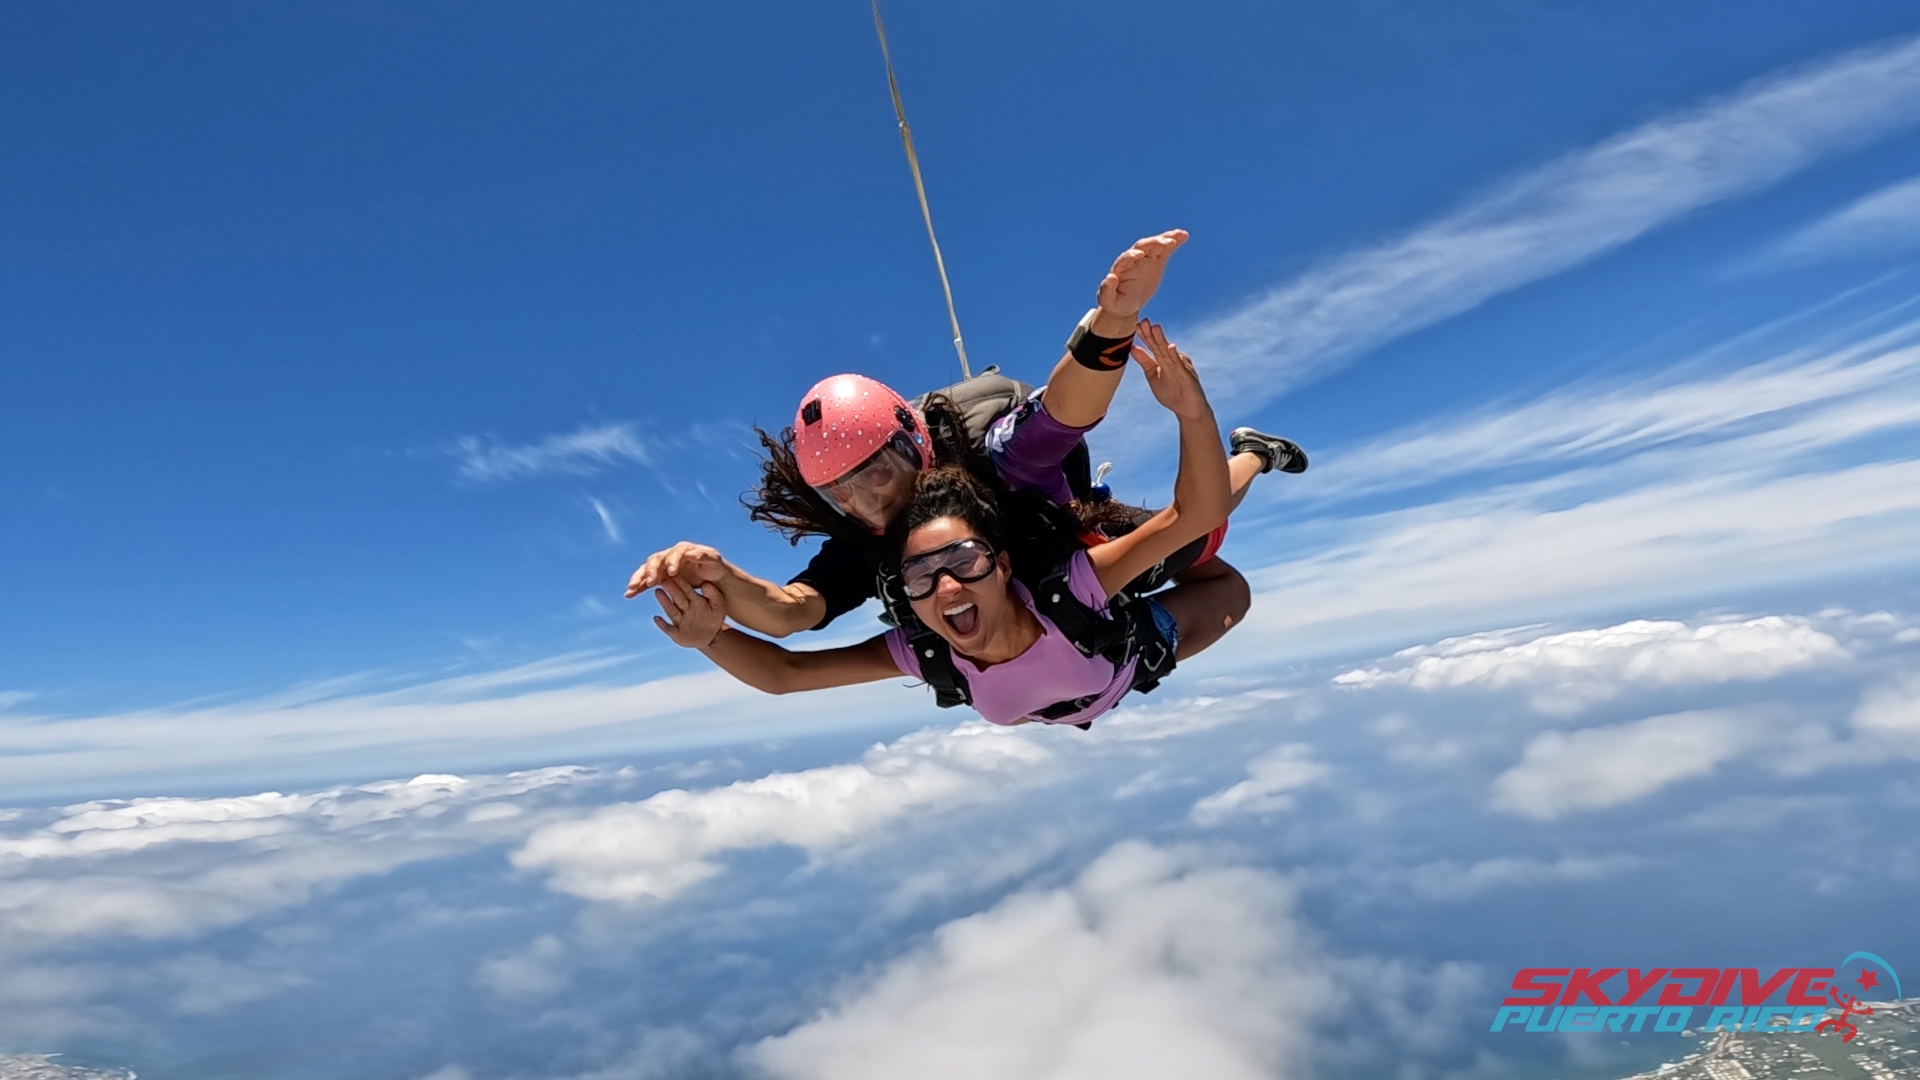  Angelica Johnson lived in Thailand for three years and is working on earning an AFF skydiving license. 